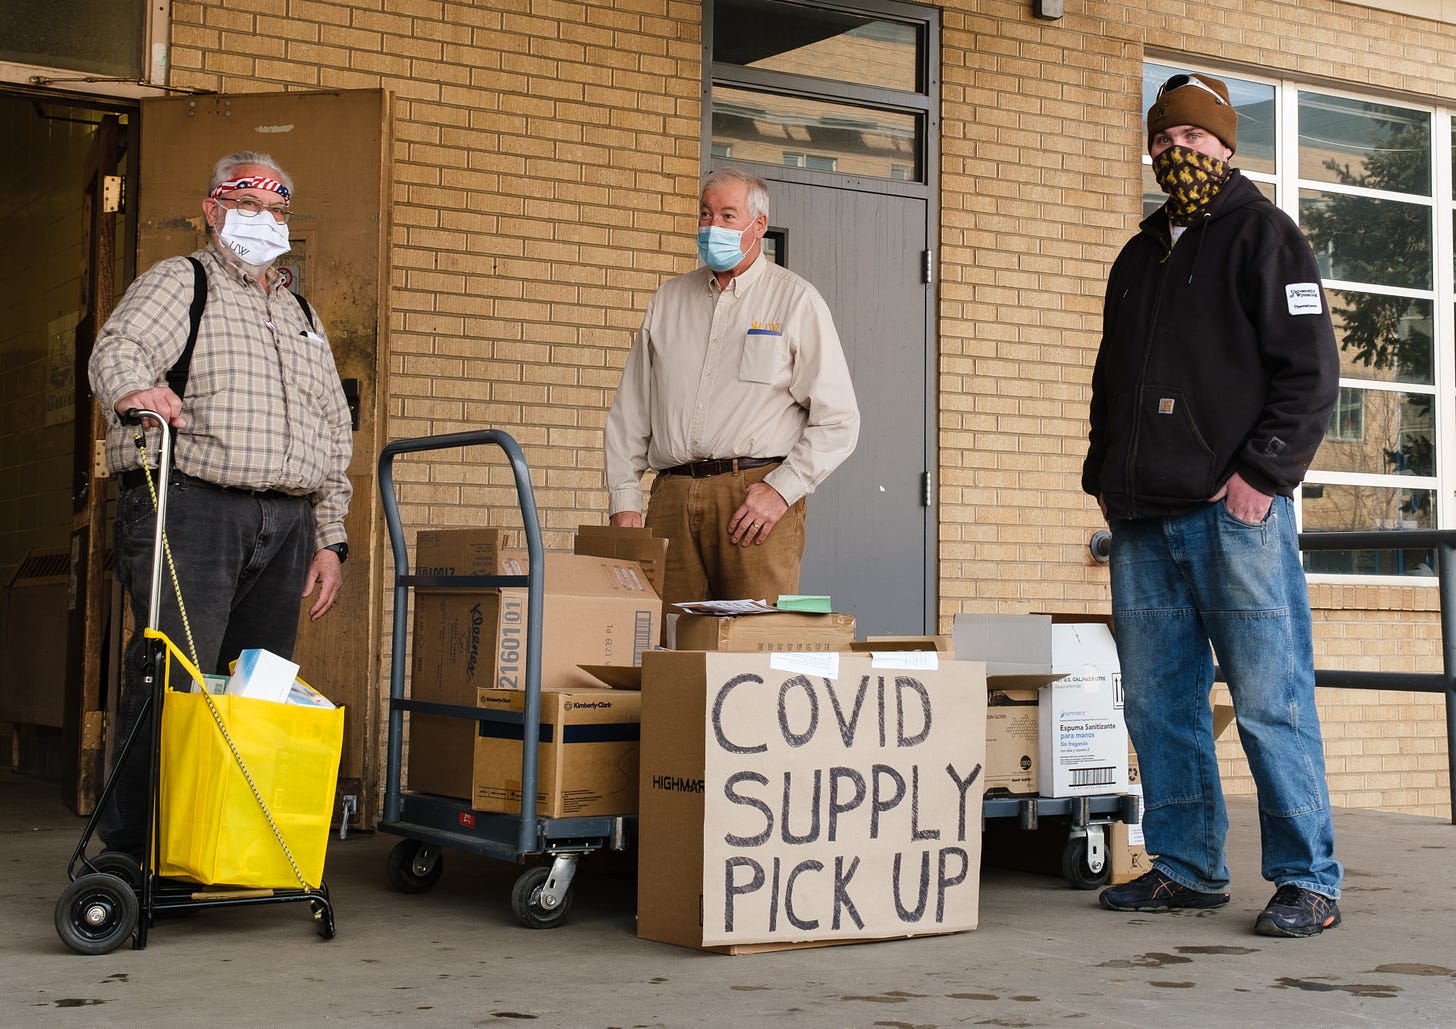 Faculty members (left to right) John Benedik, Bill McCleary and Peter Wolfinbarger at the north side Crane Hall loading dock hand out COVID supplies